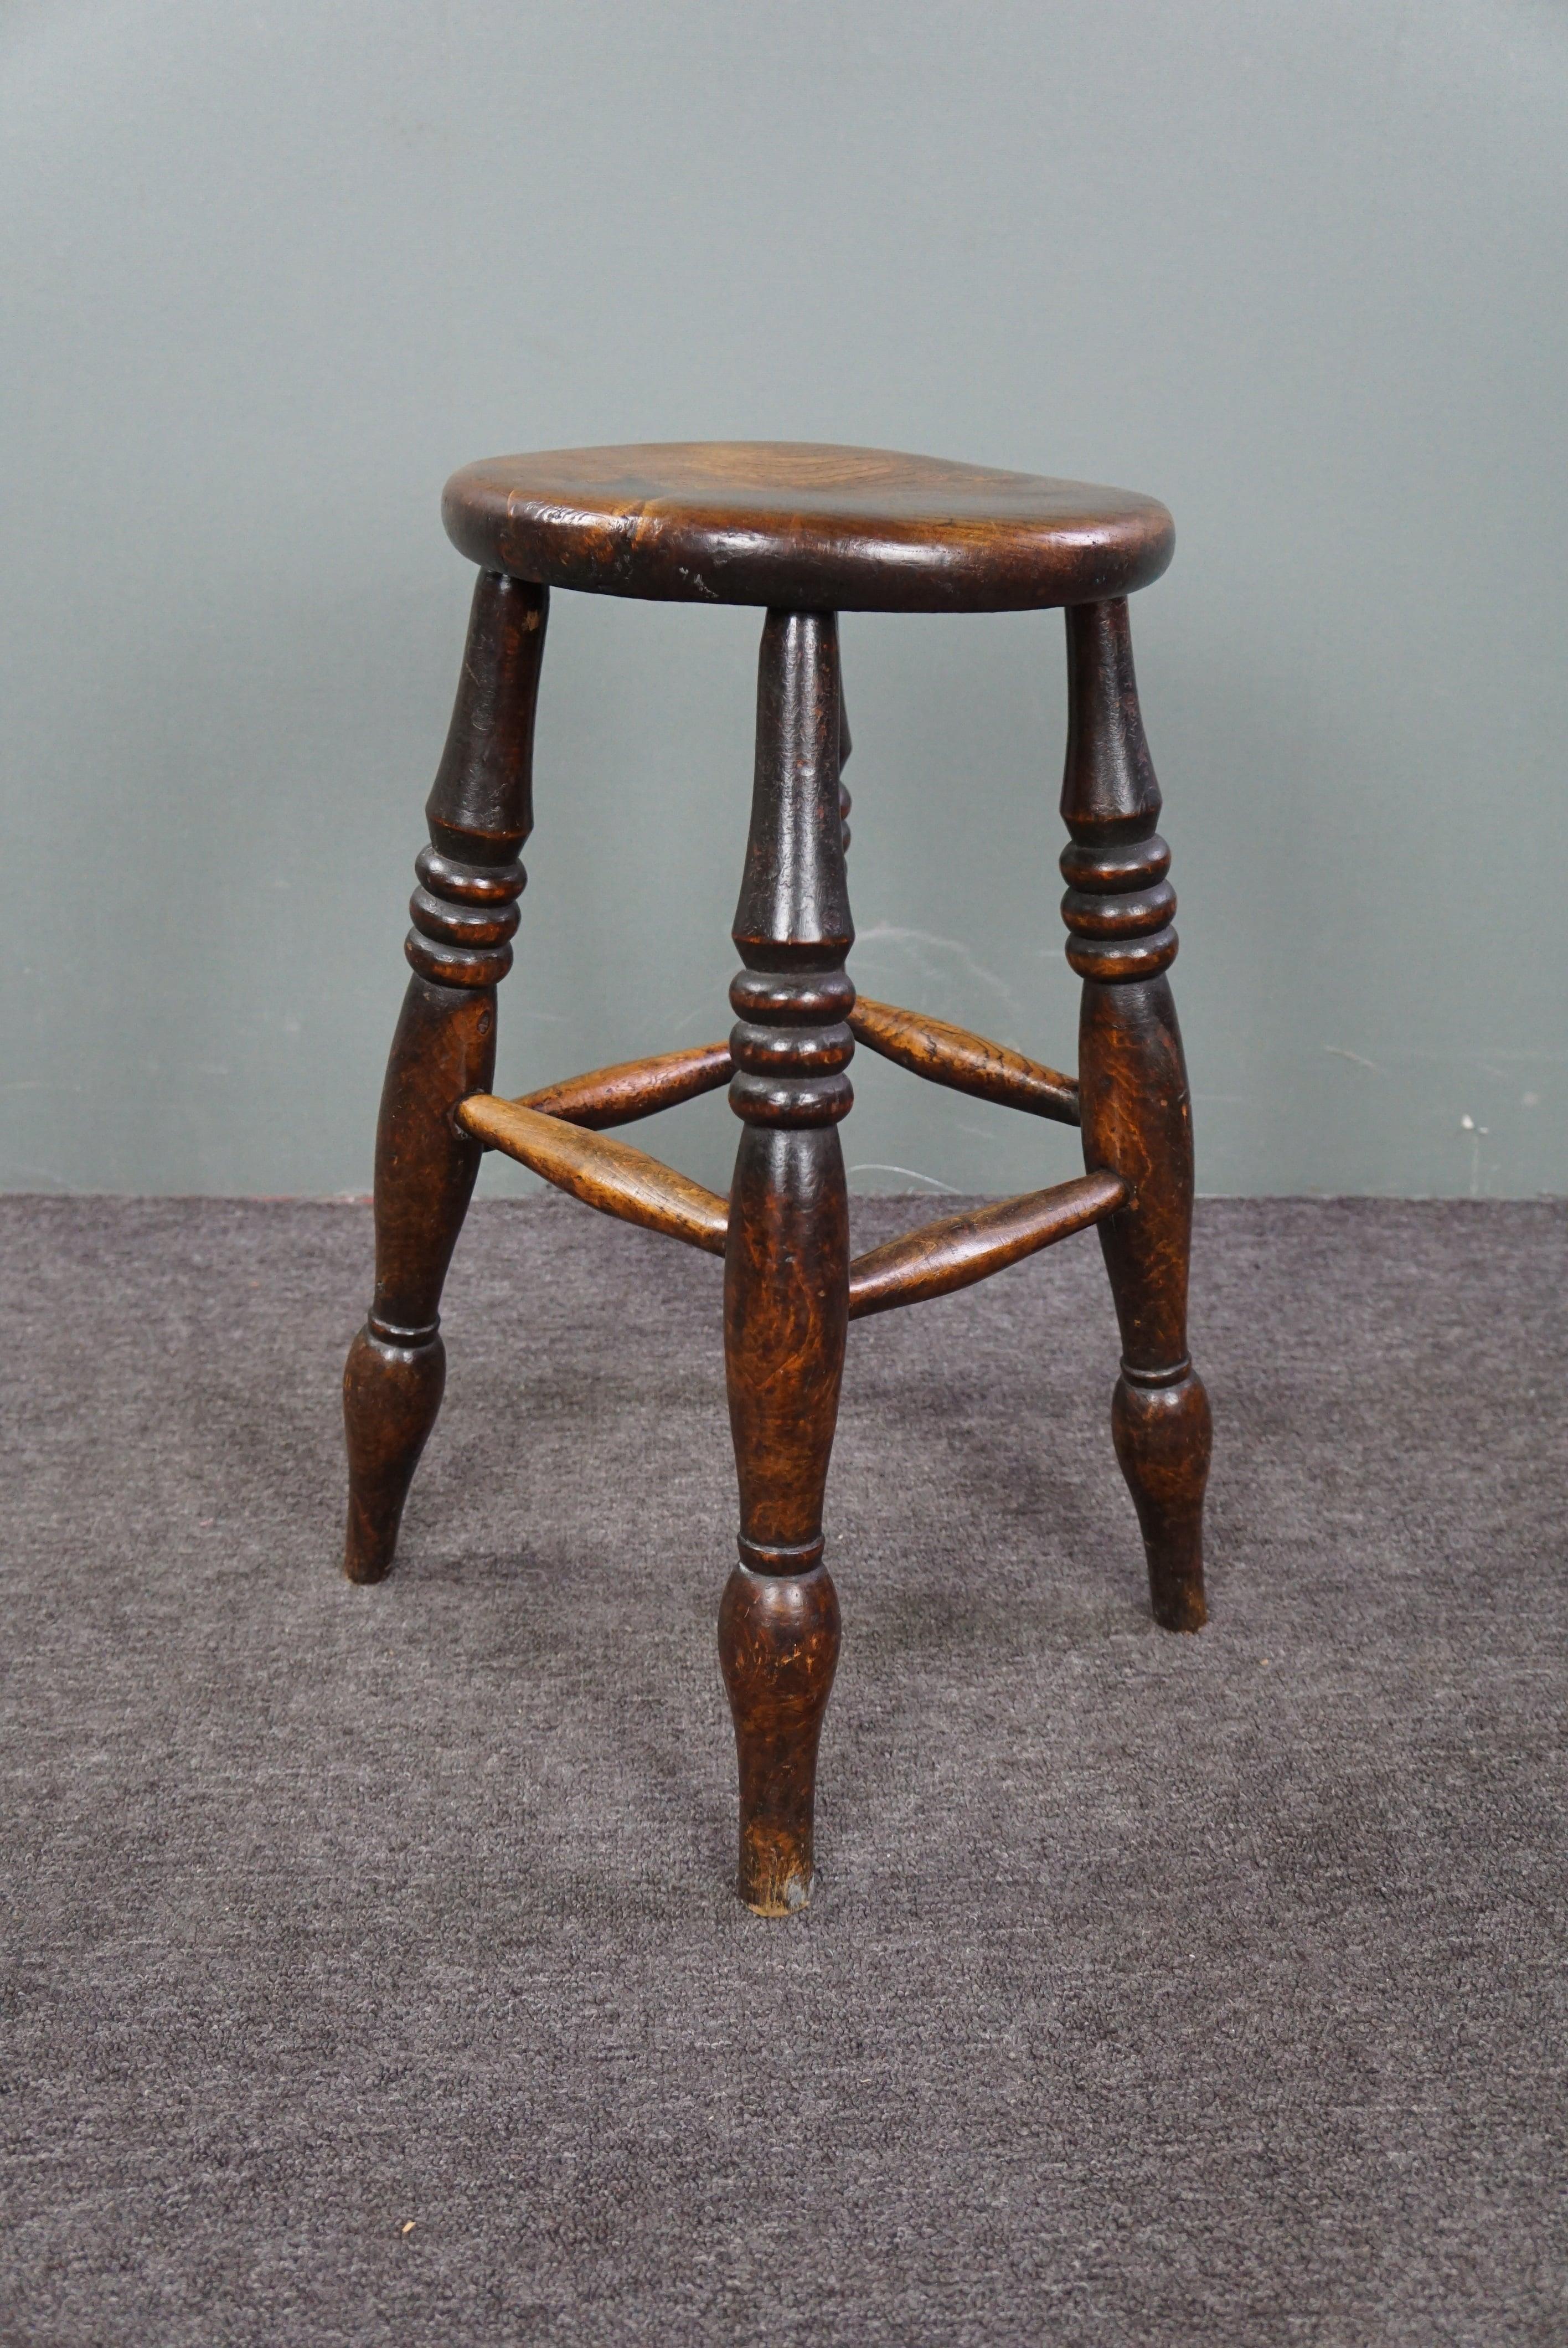 Offered is this beautiful English late 18th-century Windsor stool. This lovely stool is in a very good and stable condition. It's highly original and has gained a wonderful patina over the years. An absolute treasure for the enthusiast!

Please